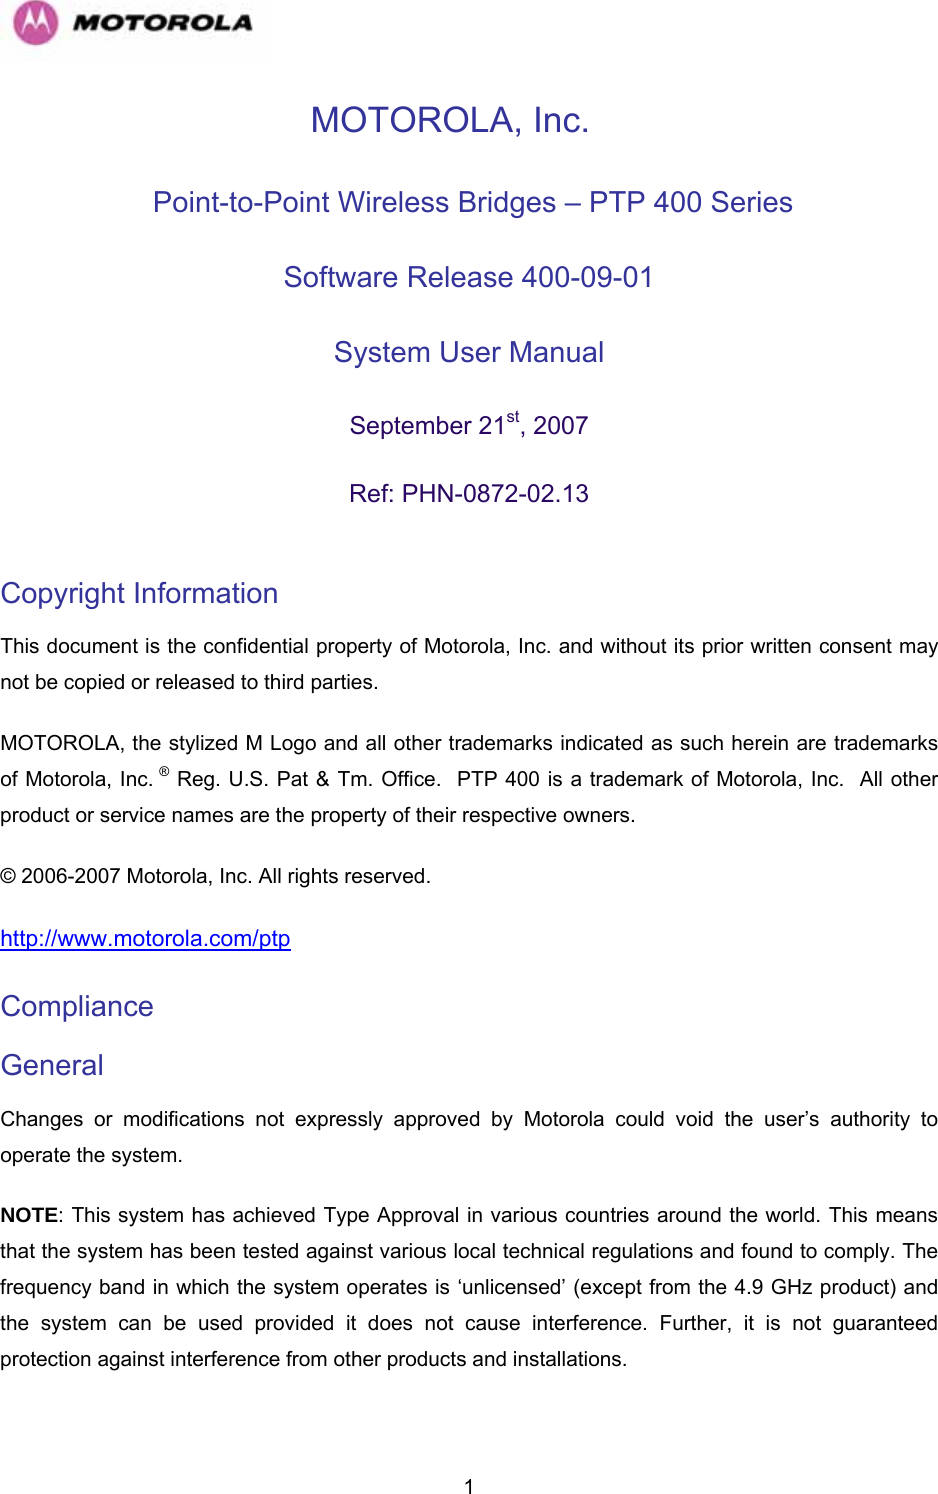   1MOTOROLA, Inc.  Point-to-Point Wireless Bridges – PTP 400 Series Software Release 400-09-01  System User Manual  September 21st, 2007 Ref: PHN-0872-02.13  Copyright Information  This document is the confidential property of Motorola, Inc. and without its prior written consent may not be copied or released to third parties.  MOTOROLA, the stylized M Logo and all other trademarks indicated as such herein are trademarks of Motorola, Inc. ® Reg. U.S. Pat &amp; Tm. Office.  PTP 400 is a trademark of Motorola, Inc.  All other product or service names are the property of their respective owners. © 2006-2007 Motorola, Inc. All rights reserved. http://www.motorola.com/ptpCompliance  General Changes or modifications not expressly approved by Motorola could void the user’s authority to operate the system.  NOTE: This system has achieved Type Approval in various countries around the world. This means that the system has been tested against various local technical regulations and found to comply. The frequency band in which the system operates is ‘unlicensed’ (except from the 4.9 GHz product) and the system can be used provided it does not cause interference. Further, it is not guaranteed protection against interference from other products and installations. 